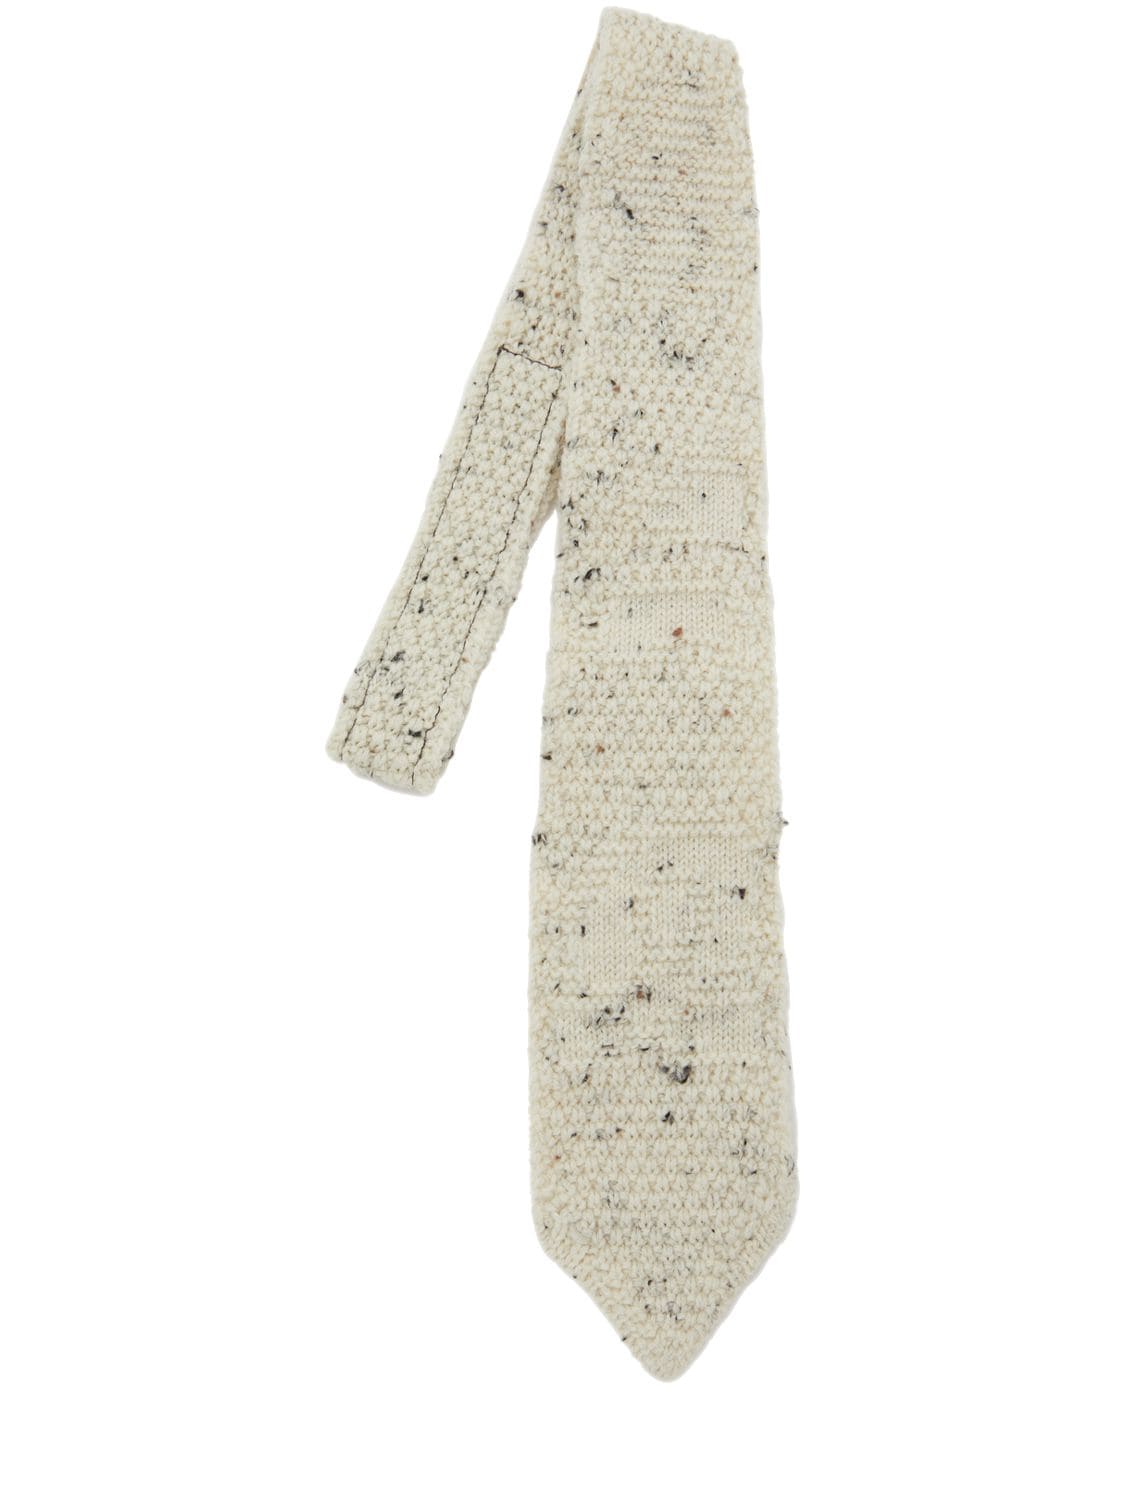 Image of Graphic Multistitch Wool Tie